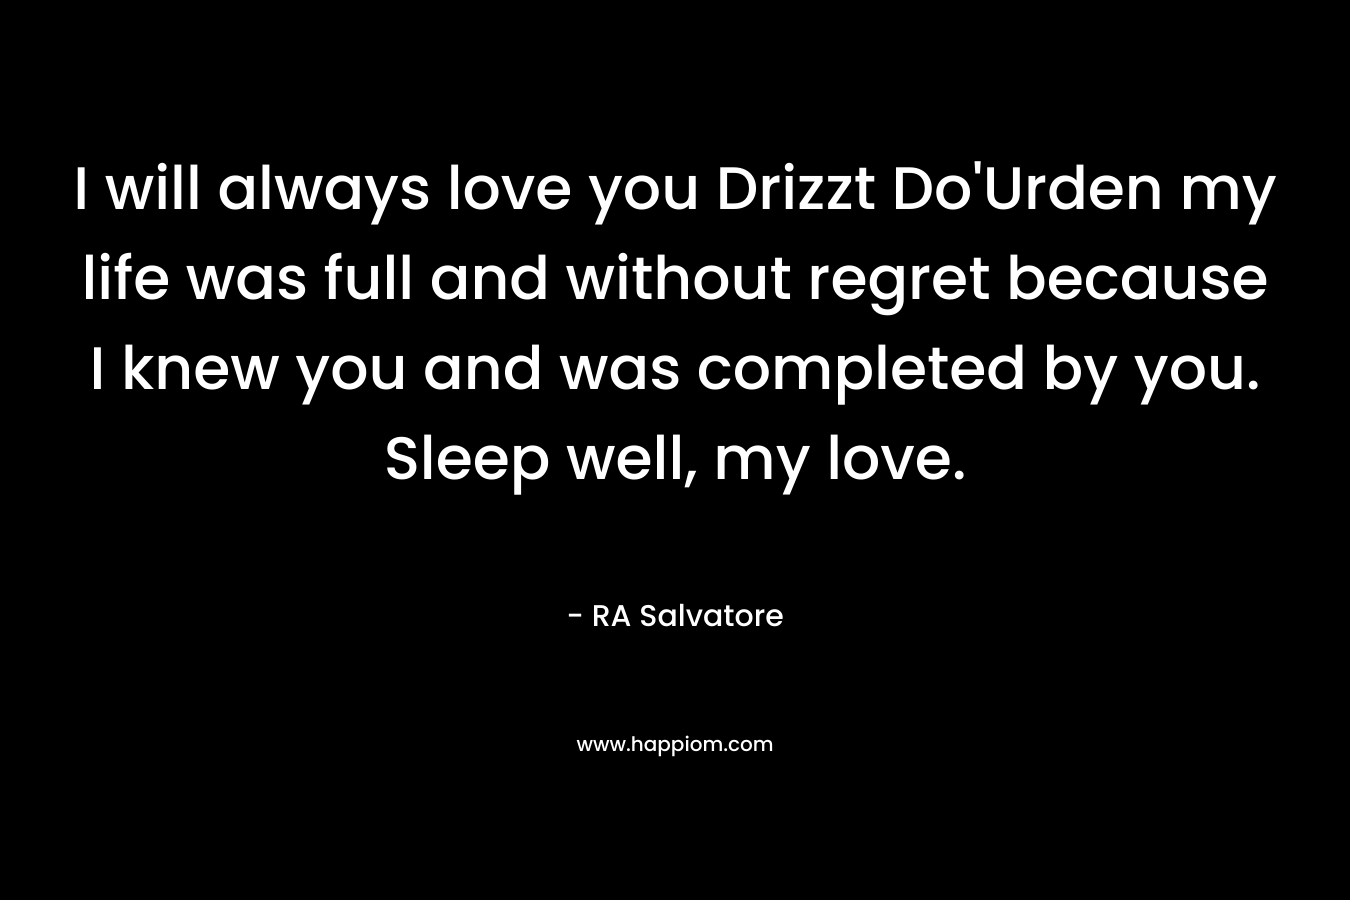 I will always love you Drizzt Do’Urden my life was full and without regret because I knew you and was completed by you. Sleep well, my love. – RA Salvatore